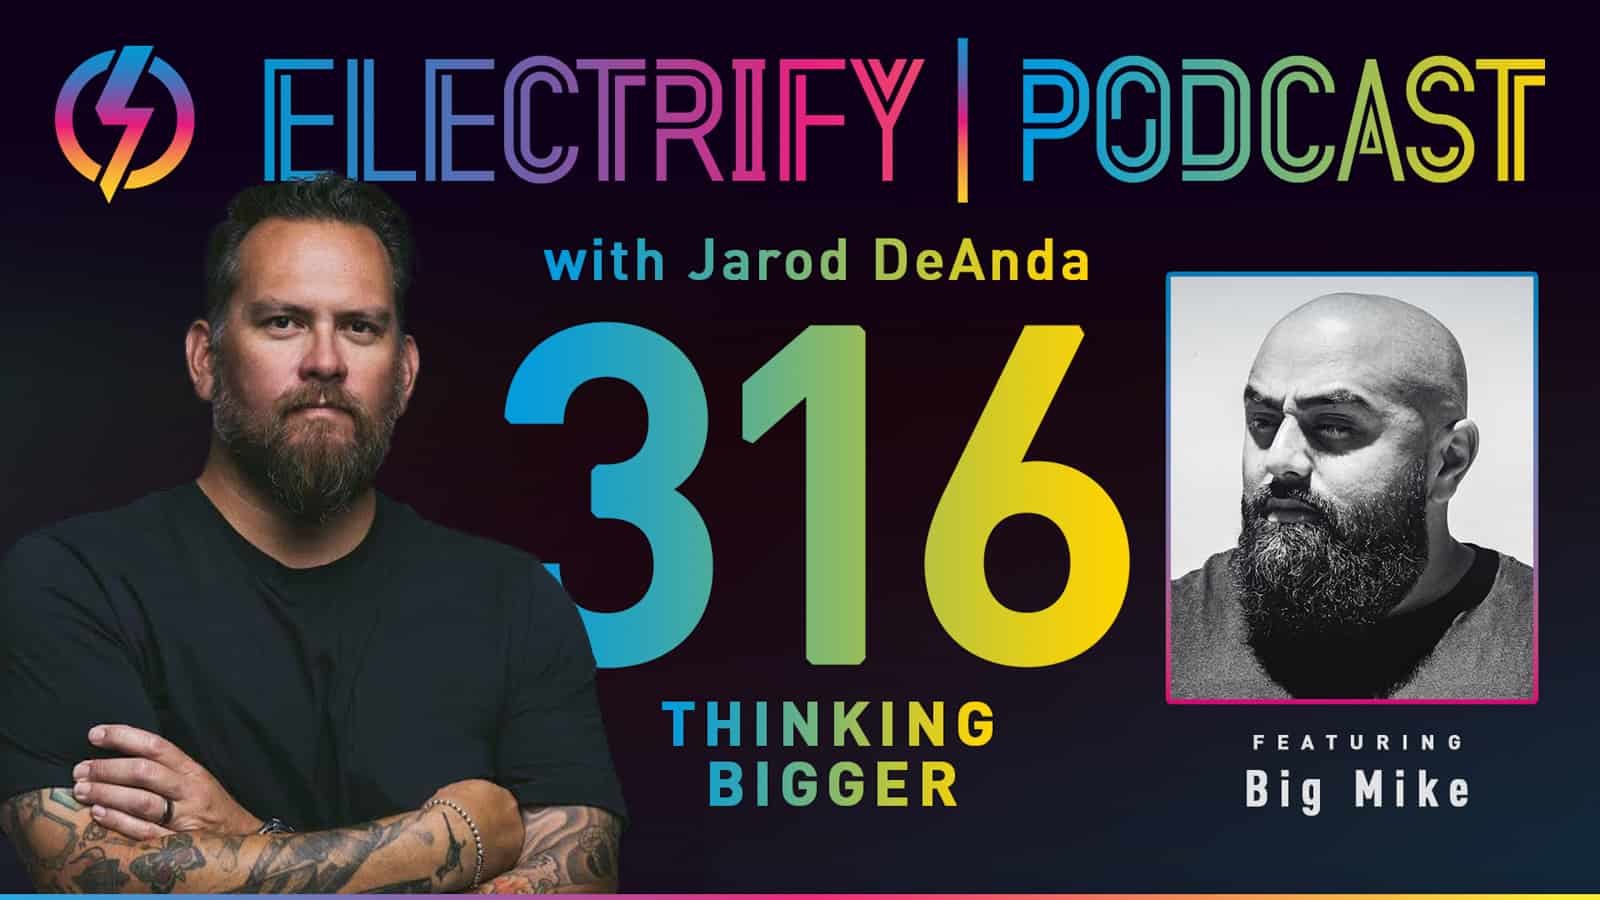 Electrify Podcast episode 316 titled 'Thinking Bigger' with host Jarod DeAnda and guest Big Mike